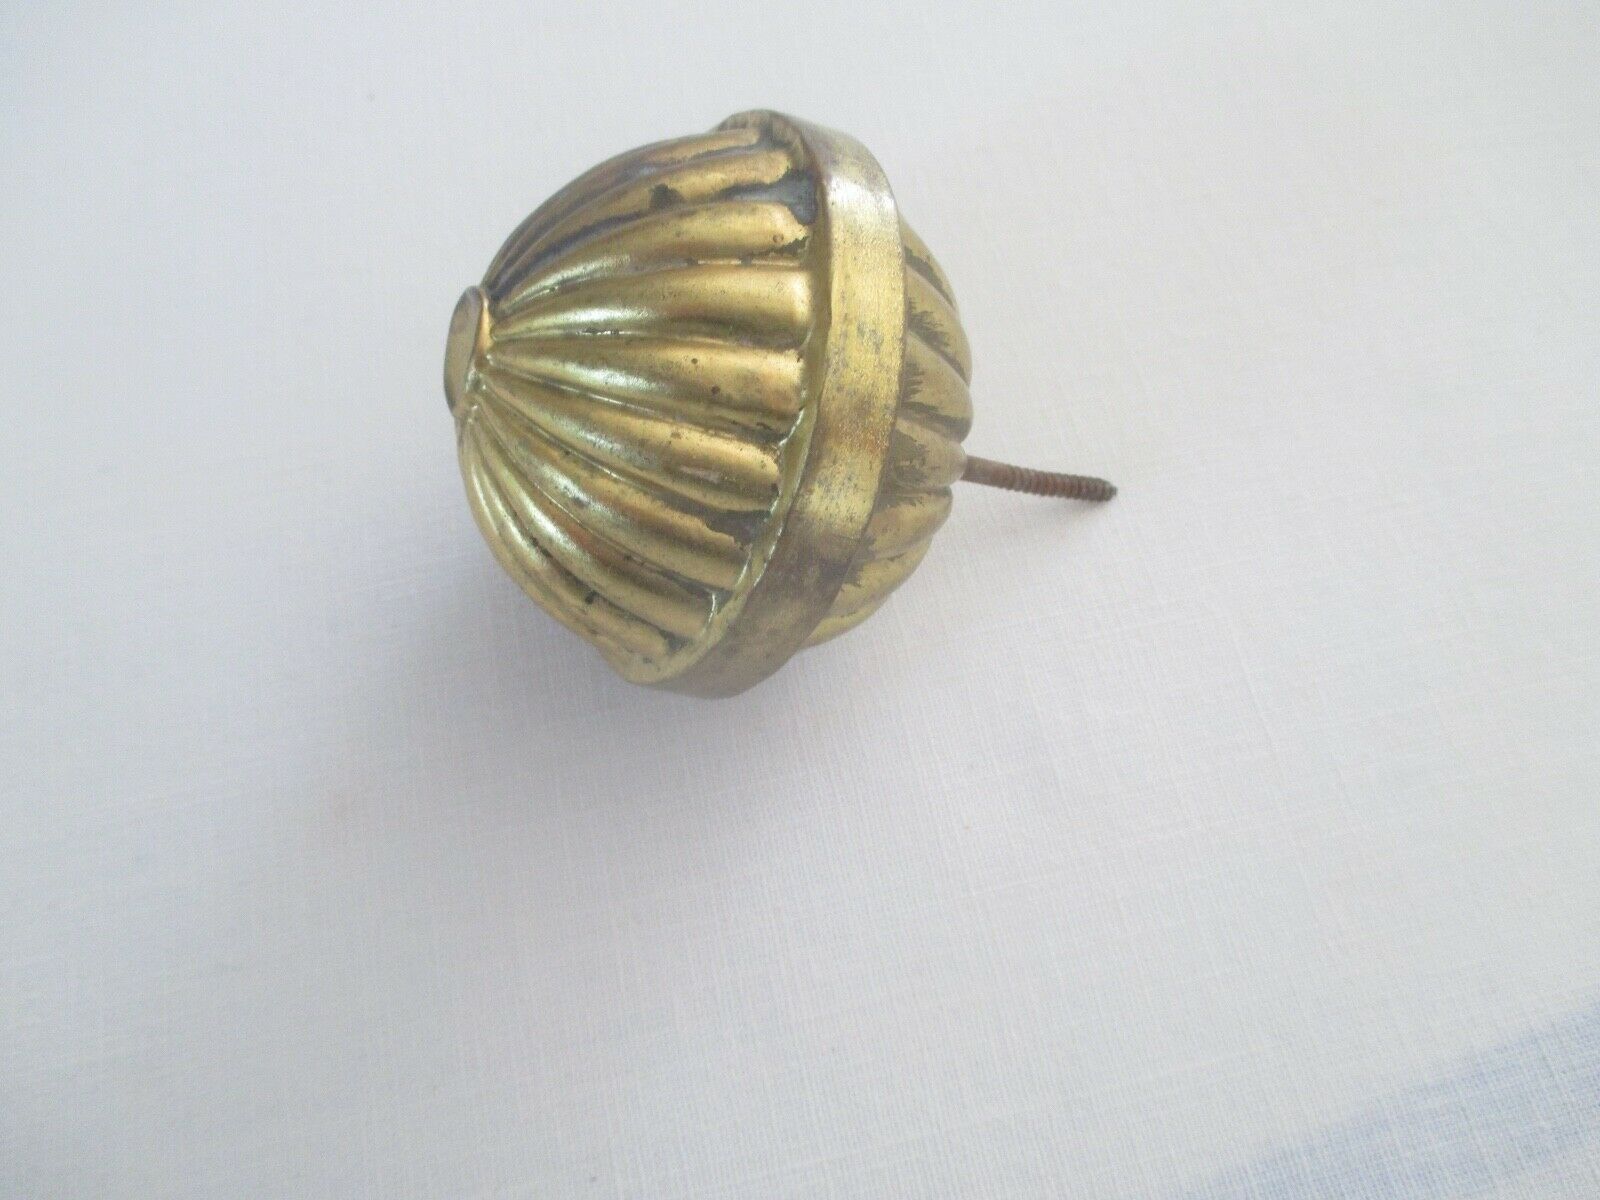 Antique Brass Ball Screw In Finial Fluted Sides For Clock, Furniture, Etc.